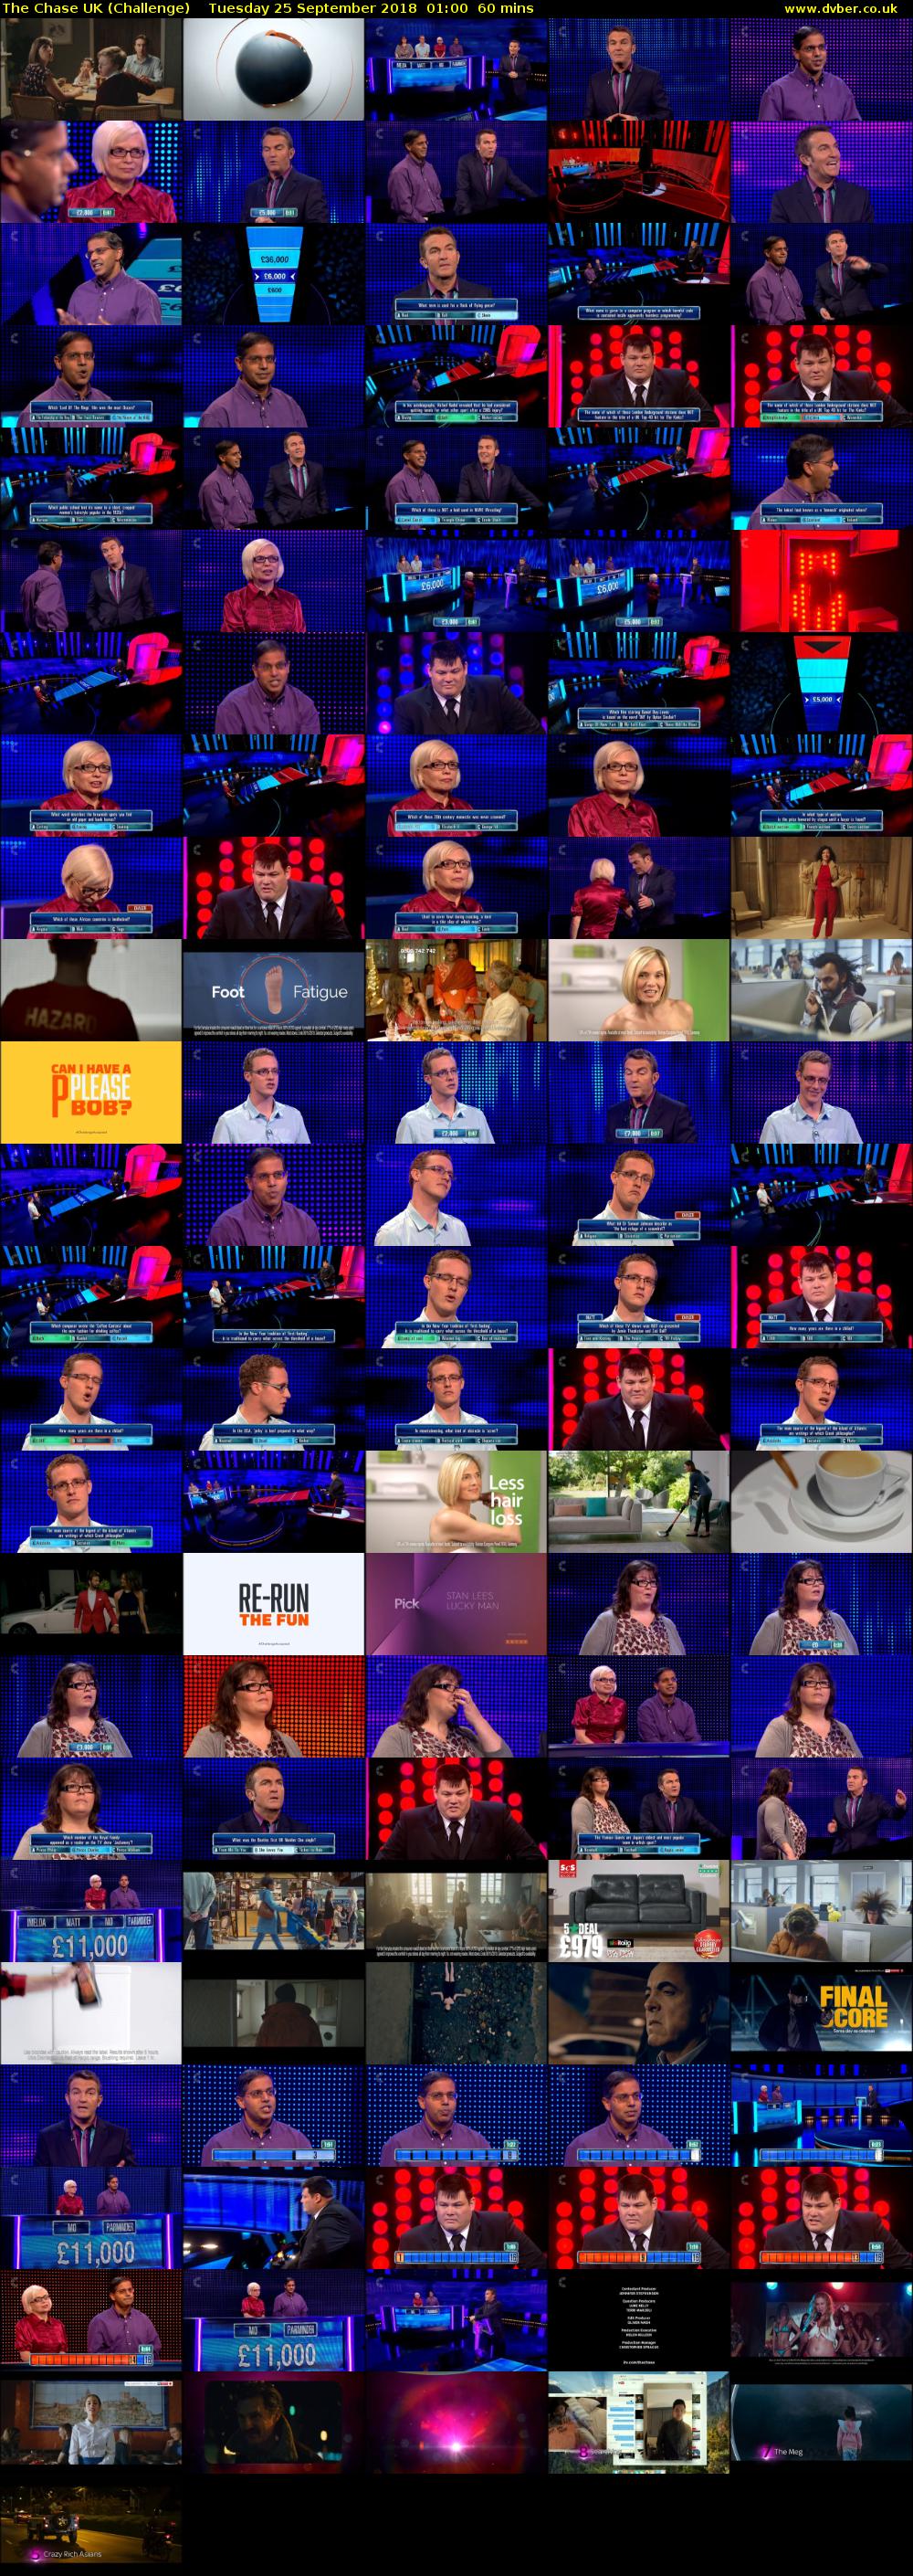 The Chase UK (Challenge) Tuesday 25 September 2018 01:00 - 02:00